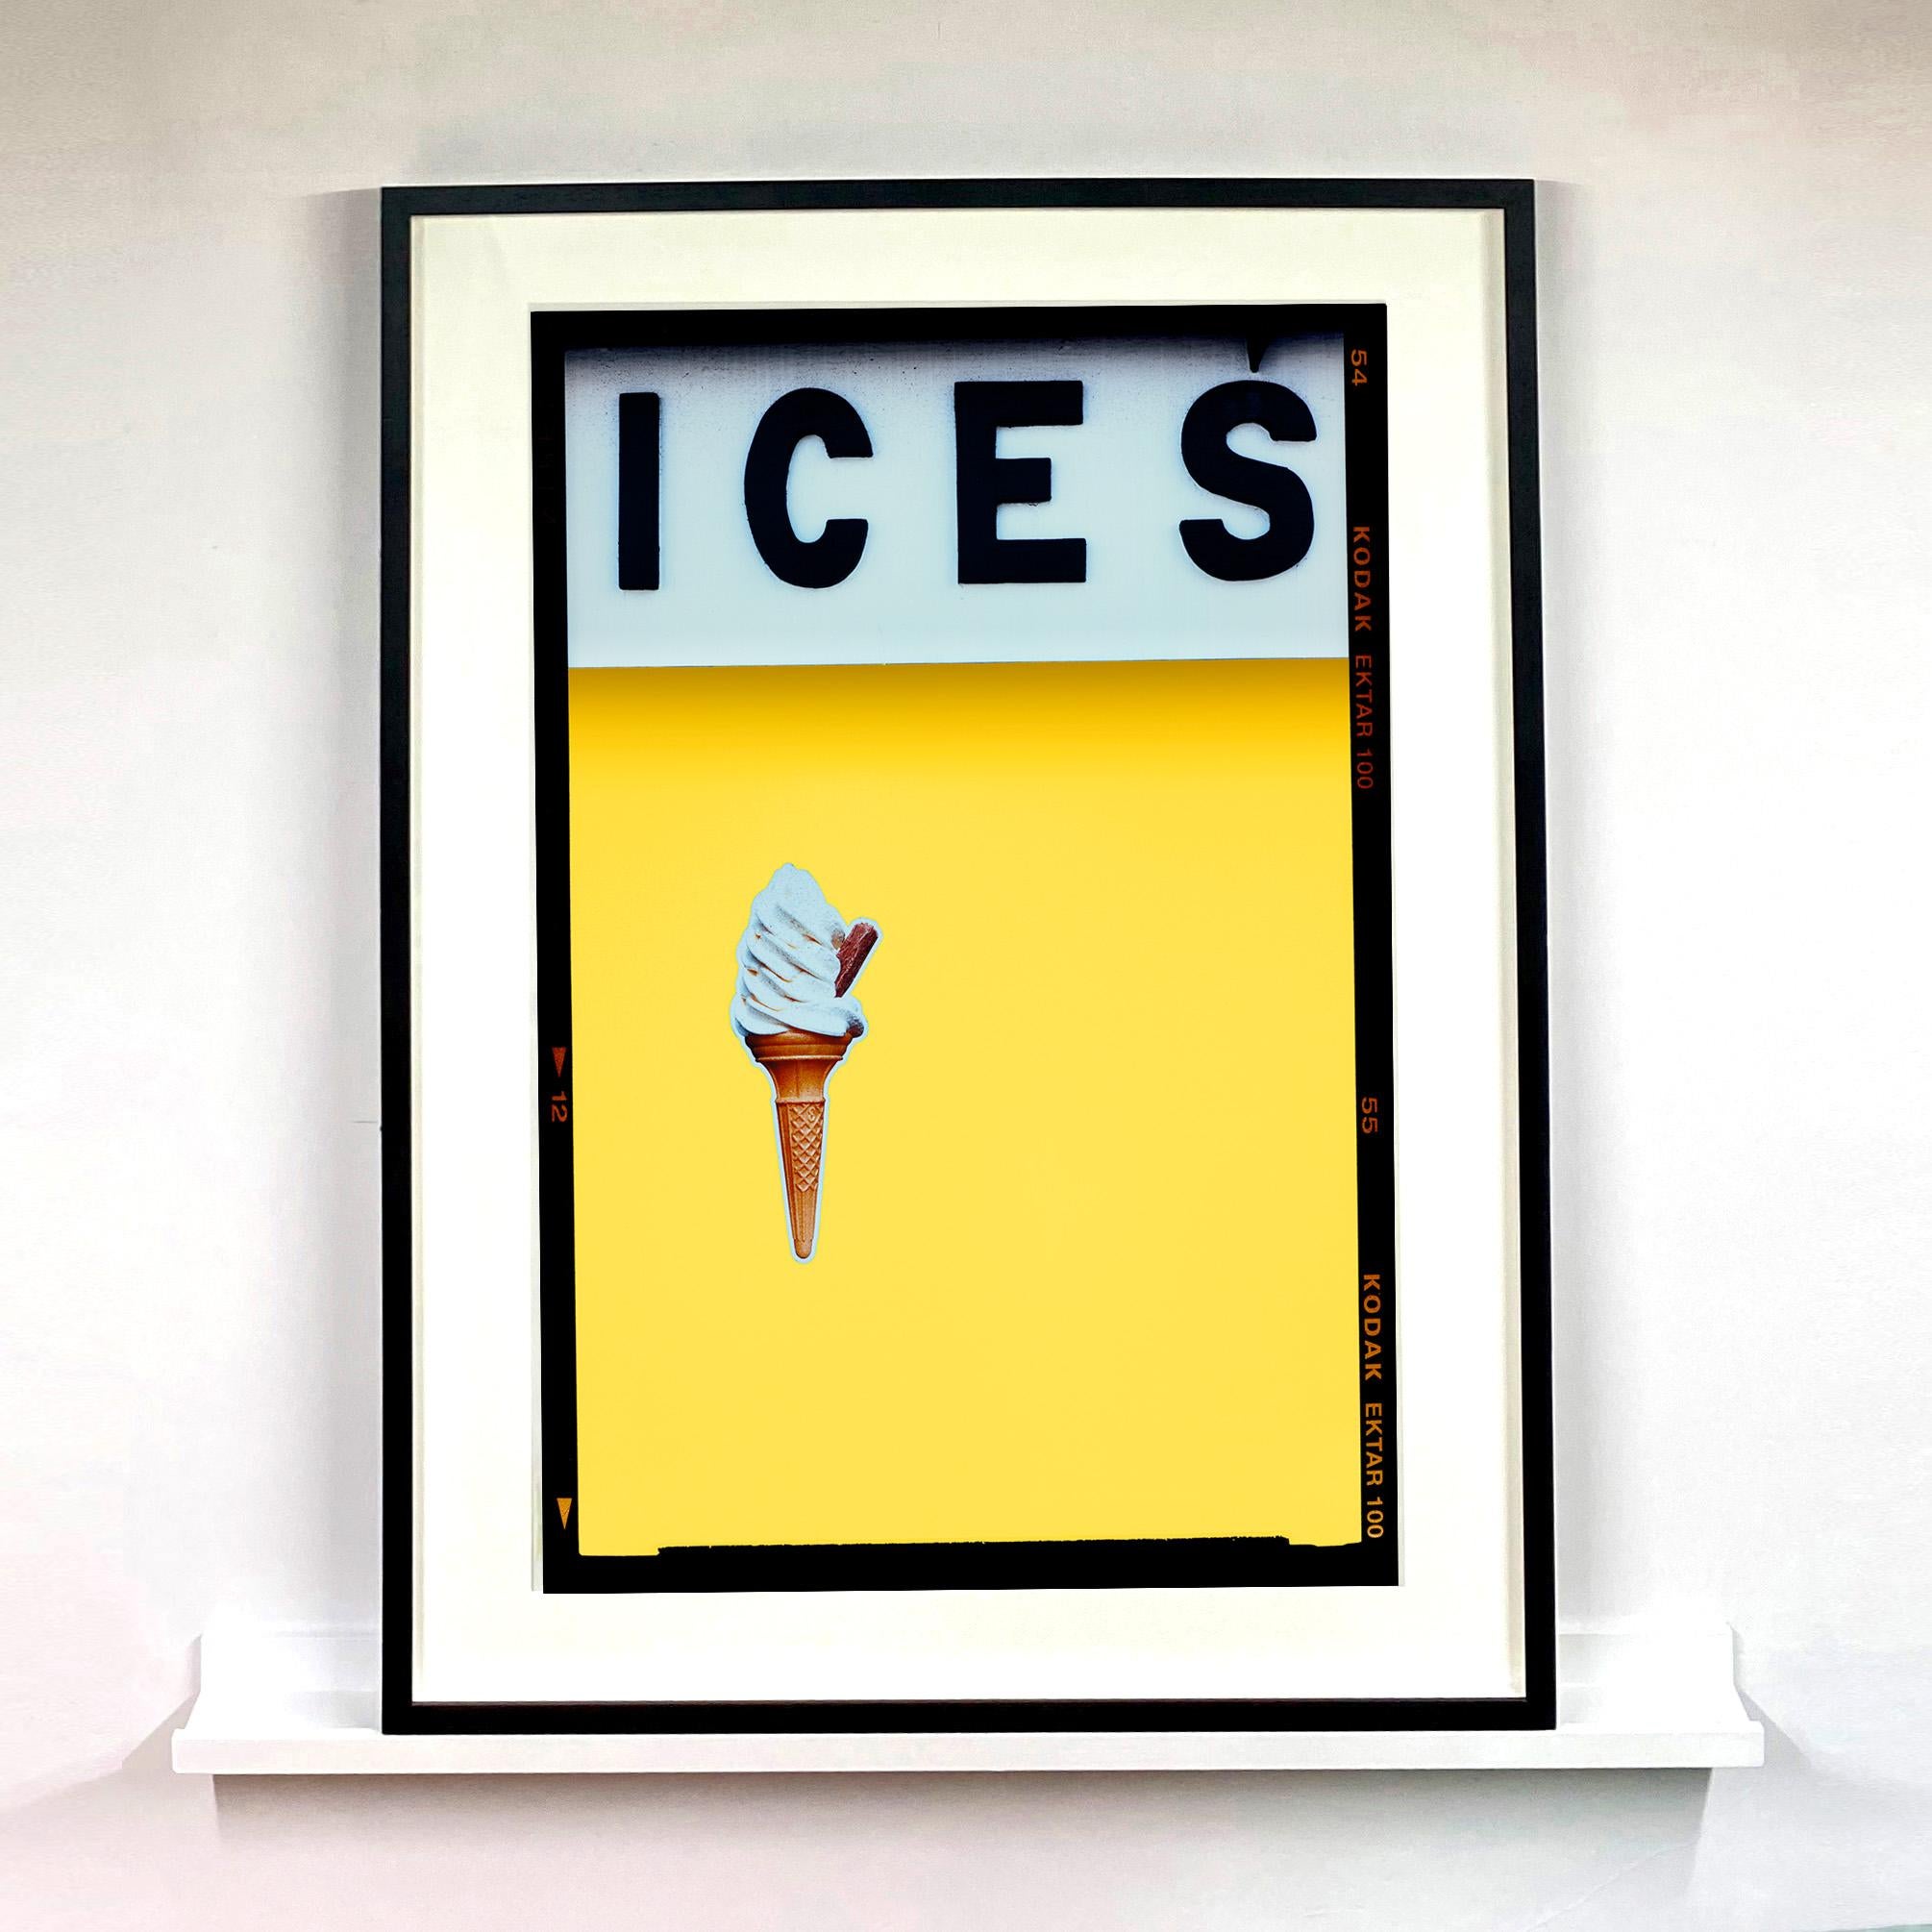 Ices (Sherbet), Bexhill-on-Sea - British pop art color photography - Pop Art Photograph by Richard Heeps